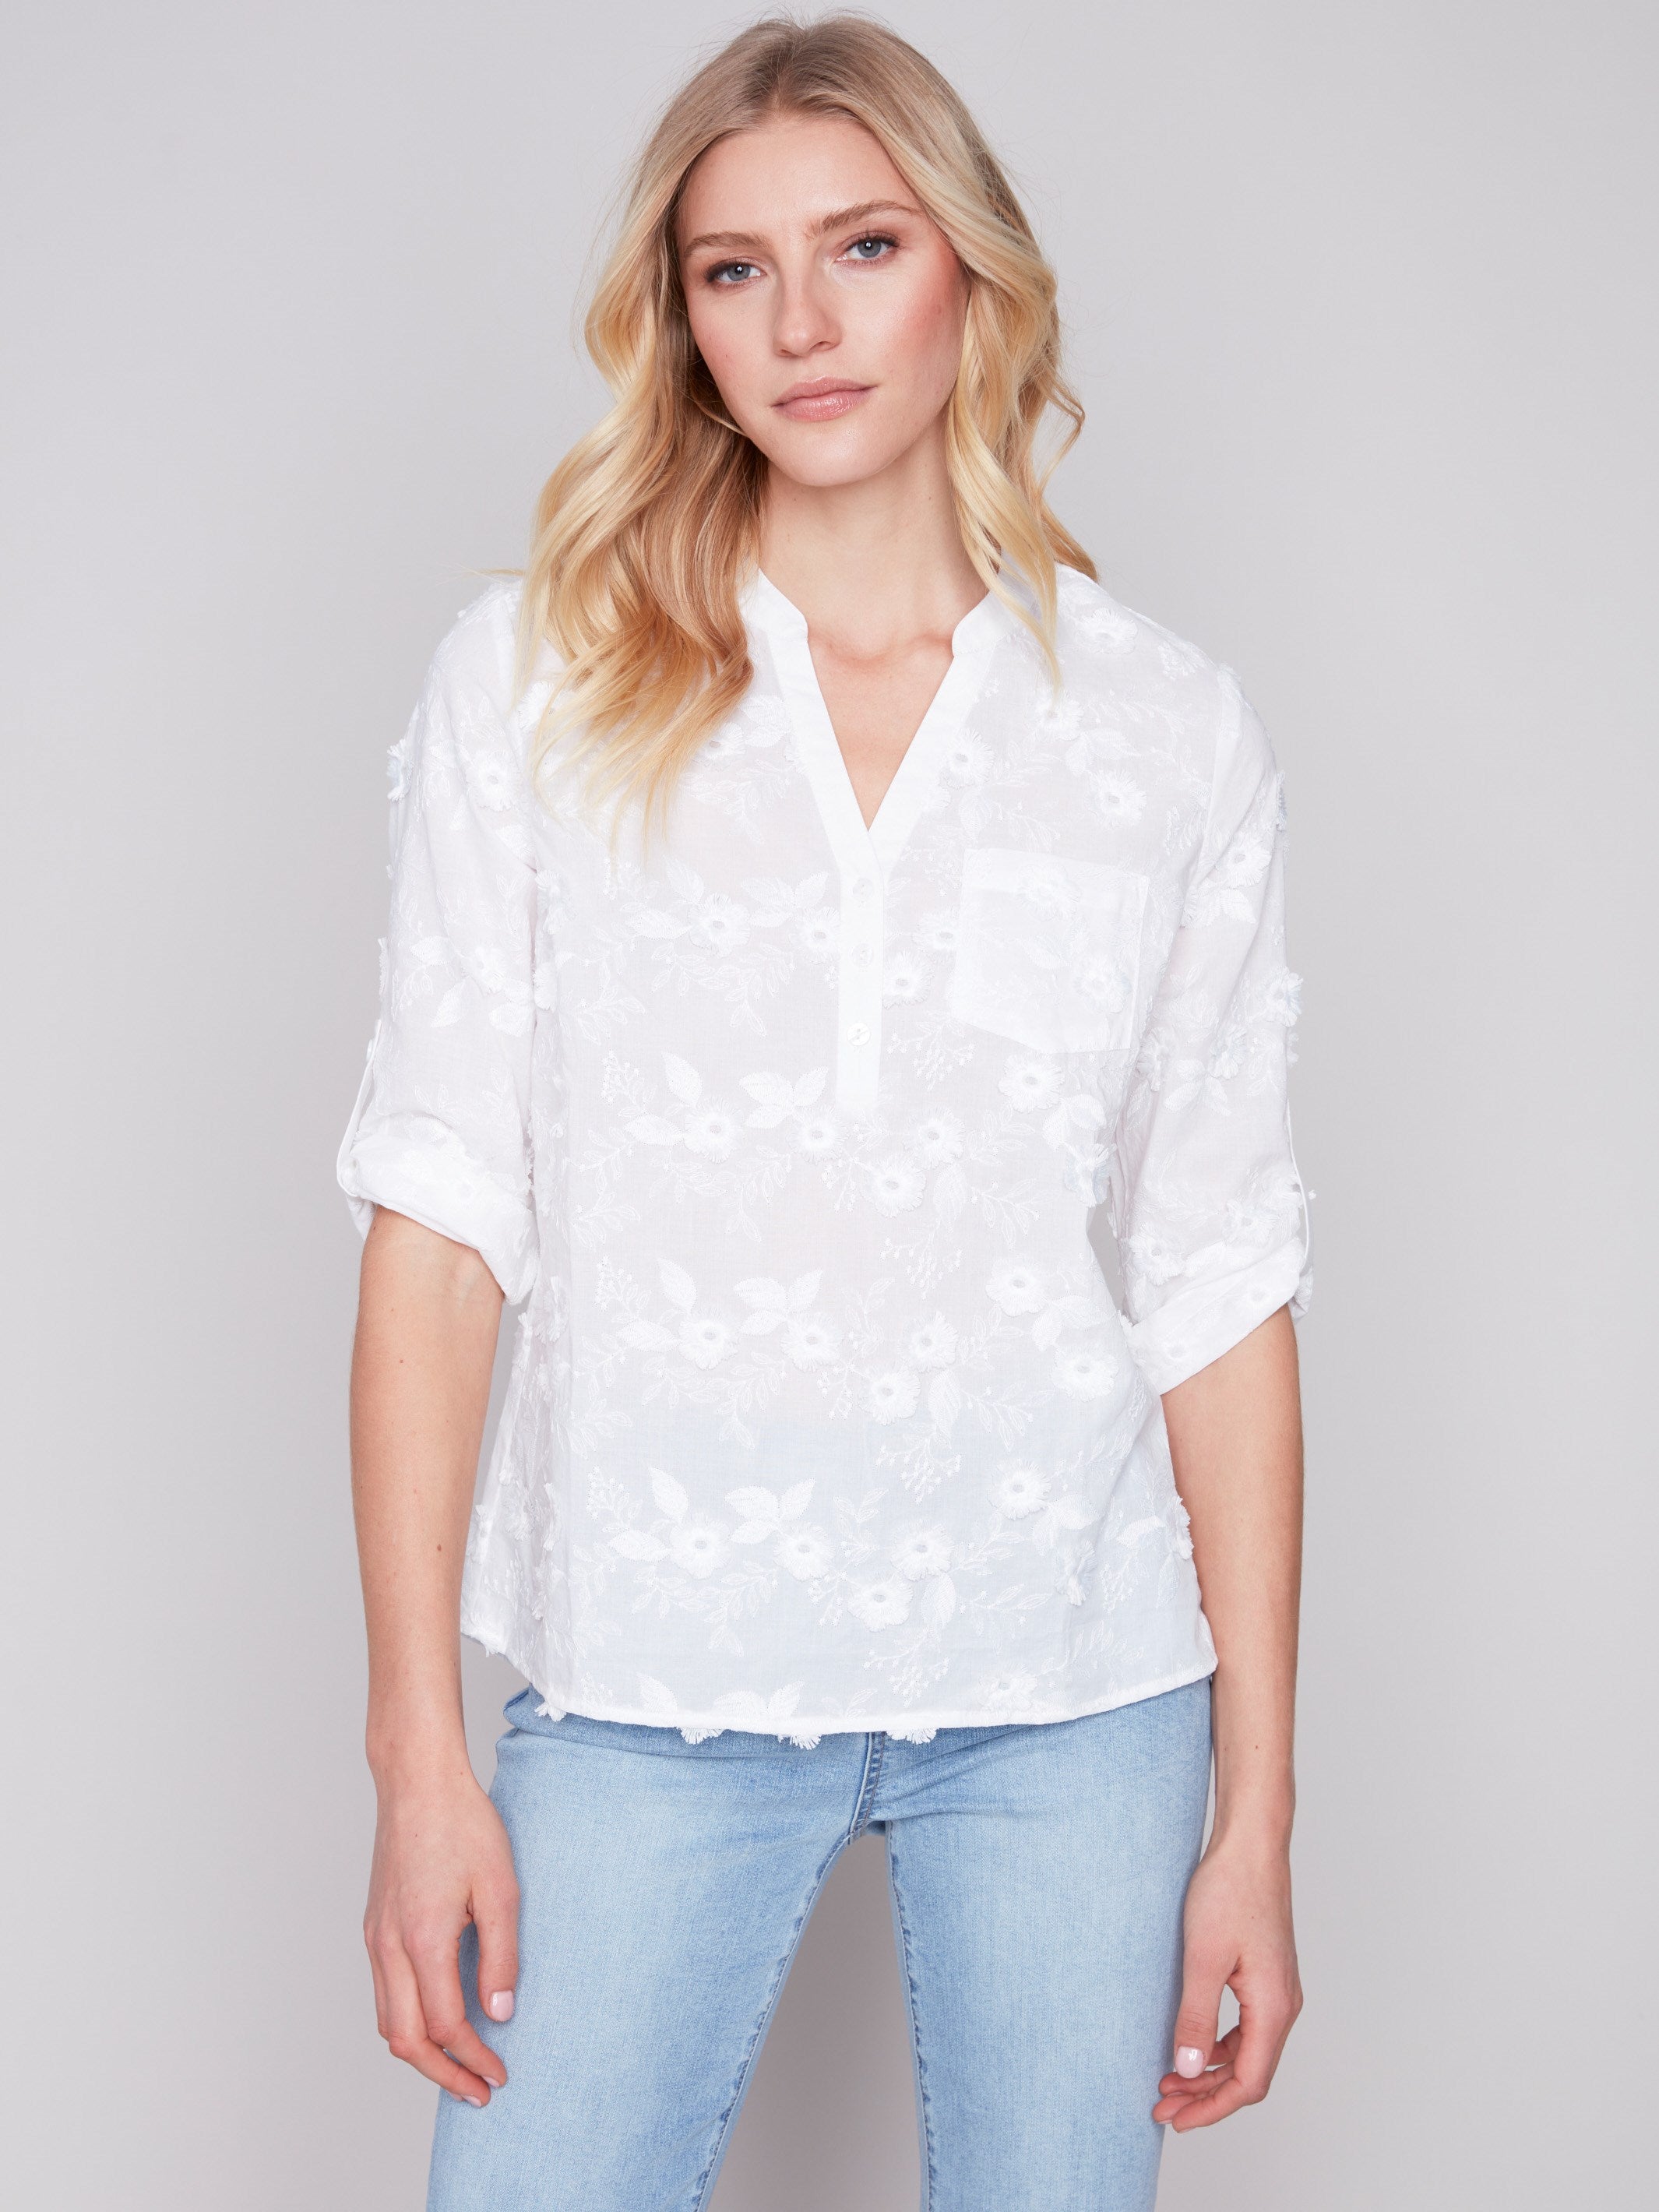 Half-Button Embroidered Cotton Blouse - White - Charlie B Collection Canada - Image 3